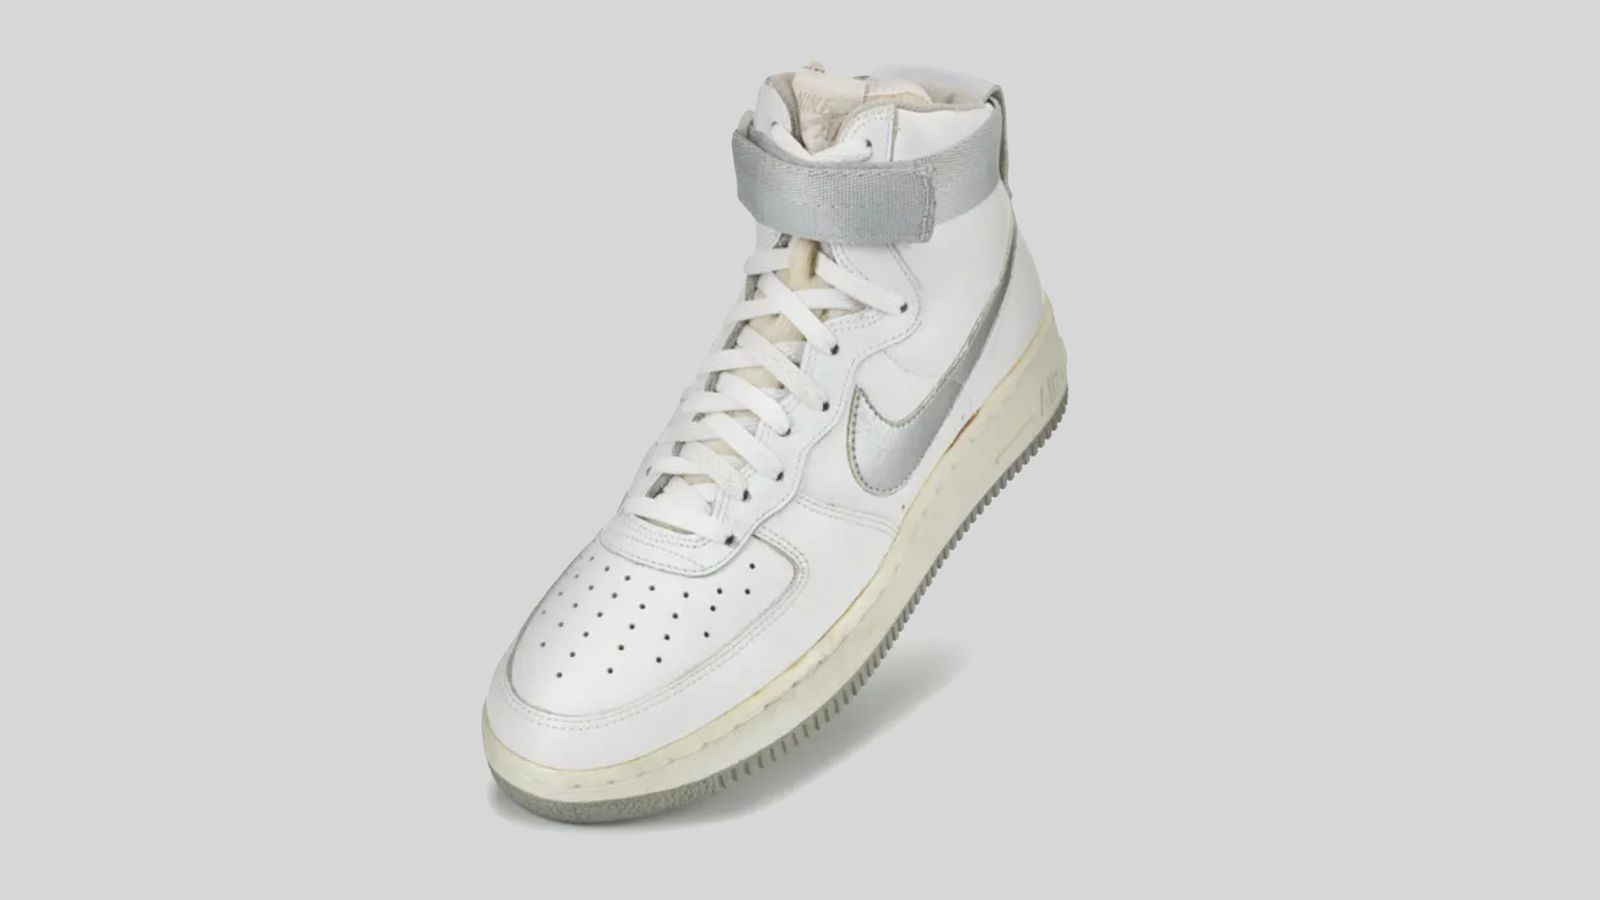 Image of an original Air Force 1 high-top in white with grey accents.